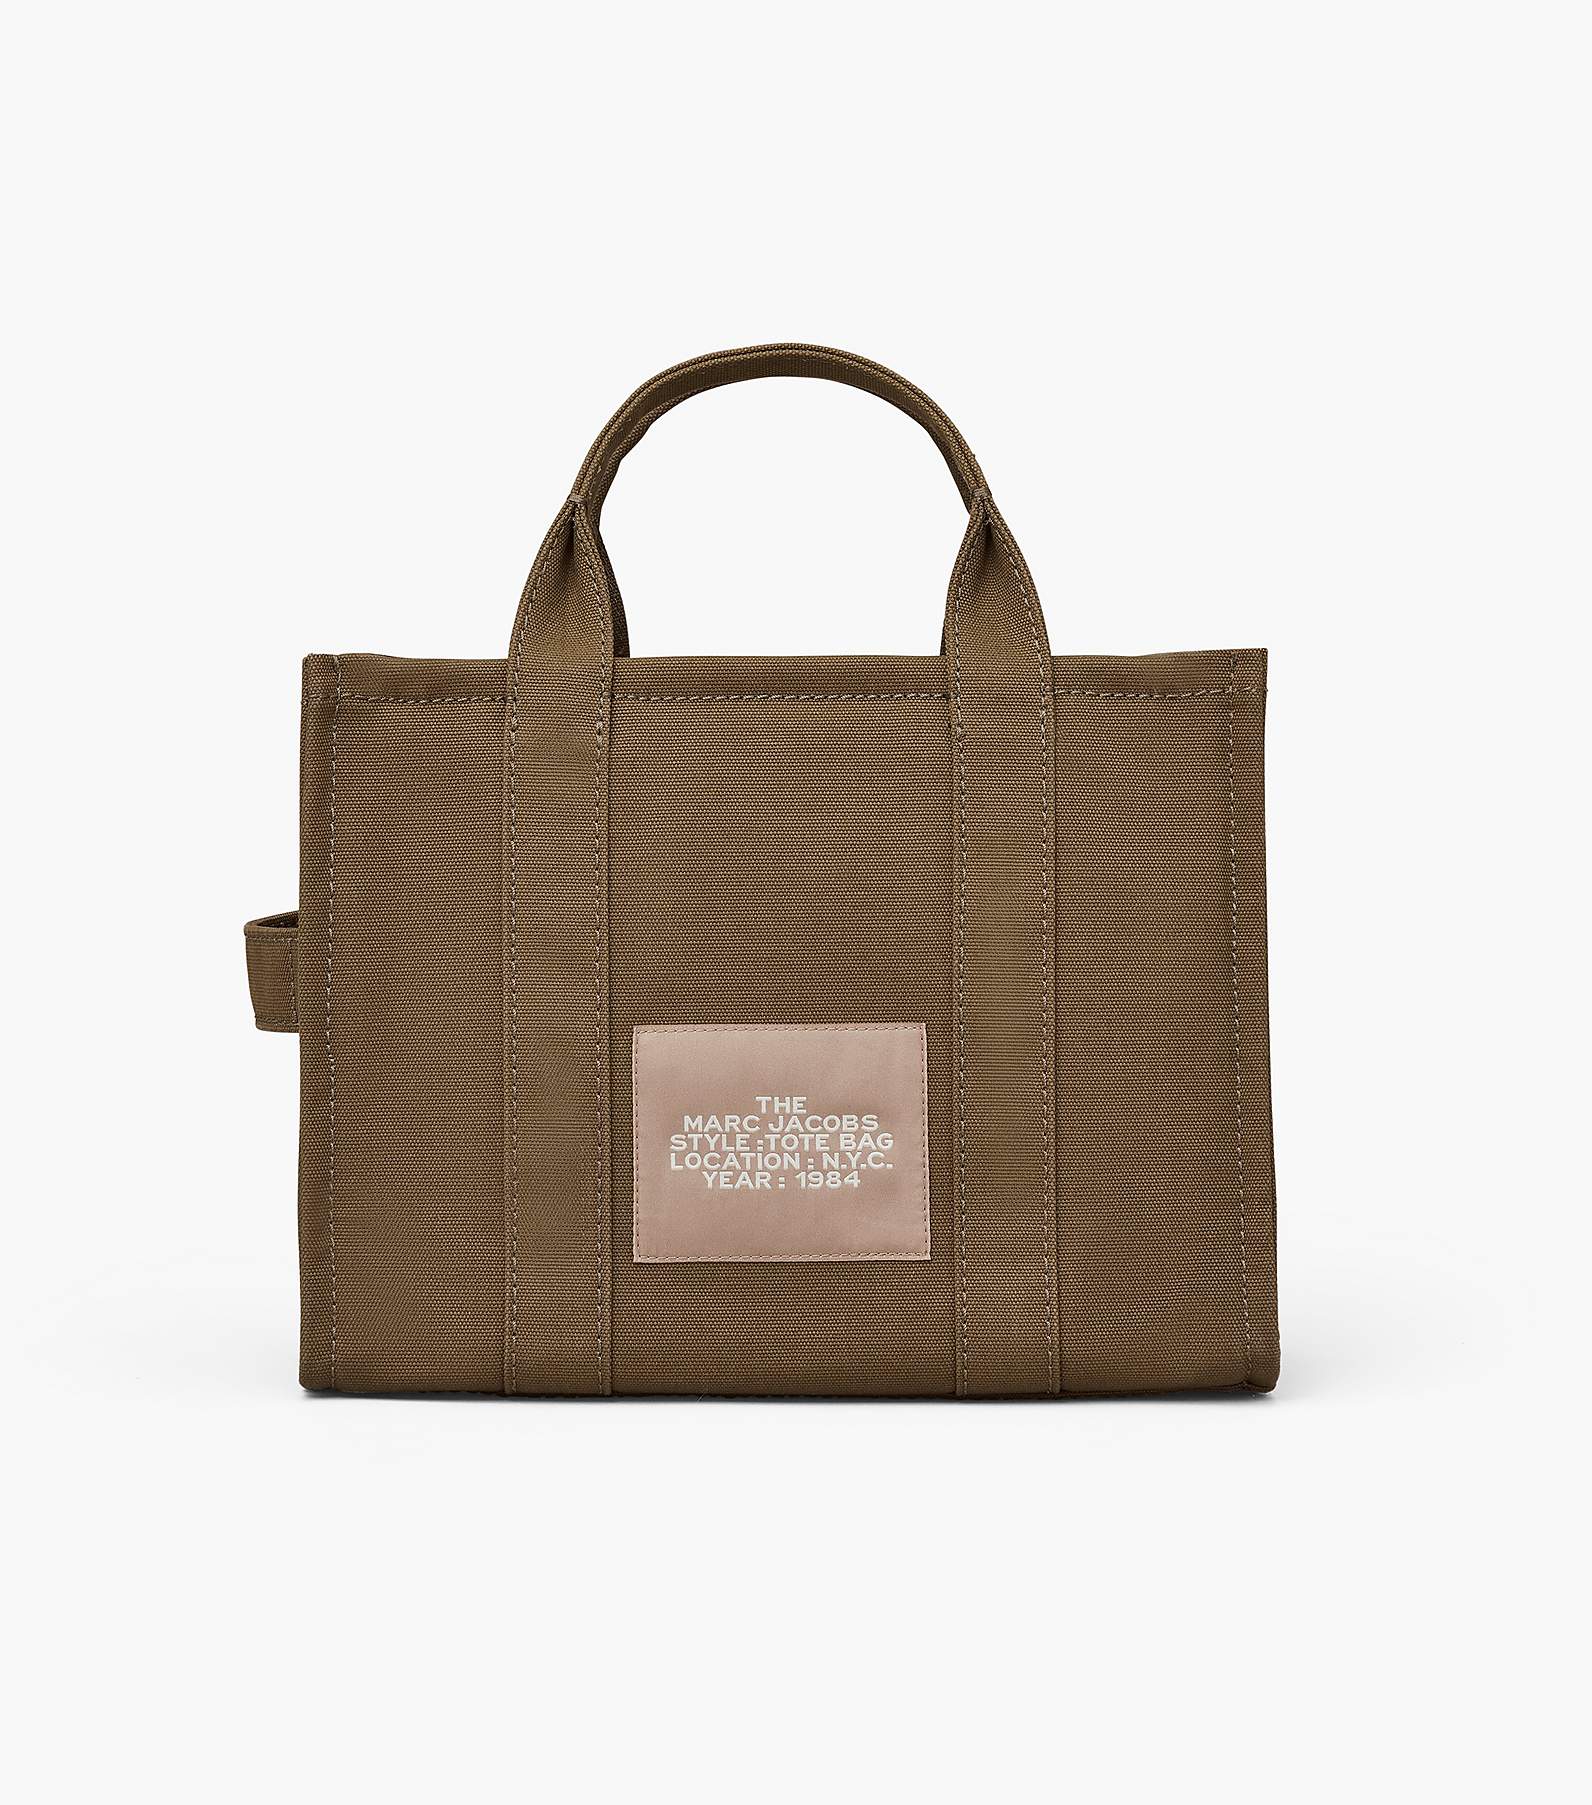 In time Quickly Abbreviate The Medium Tote Bag | Marc Jacobs | Official Site